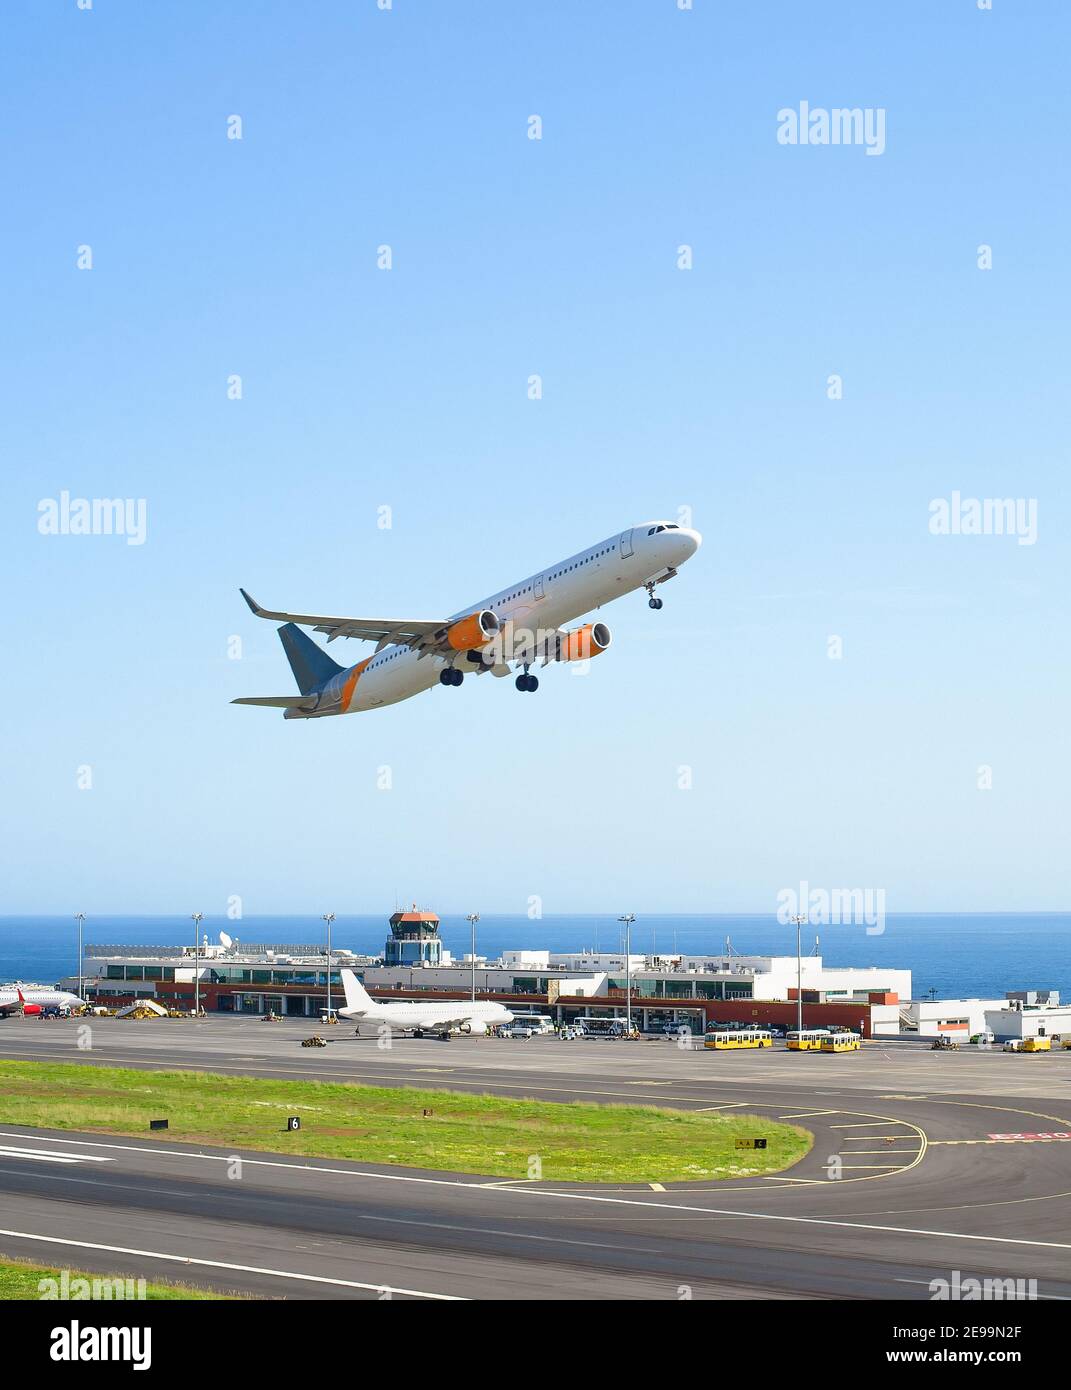 Airplane taking off International Airport skyward view, planes parked by terminal, sunshine, seascape, Funchal, Madeira Stock Photo